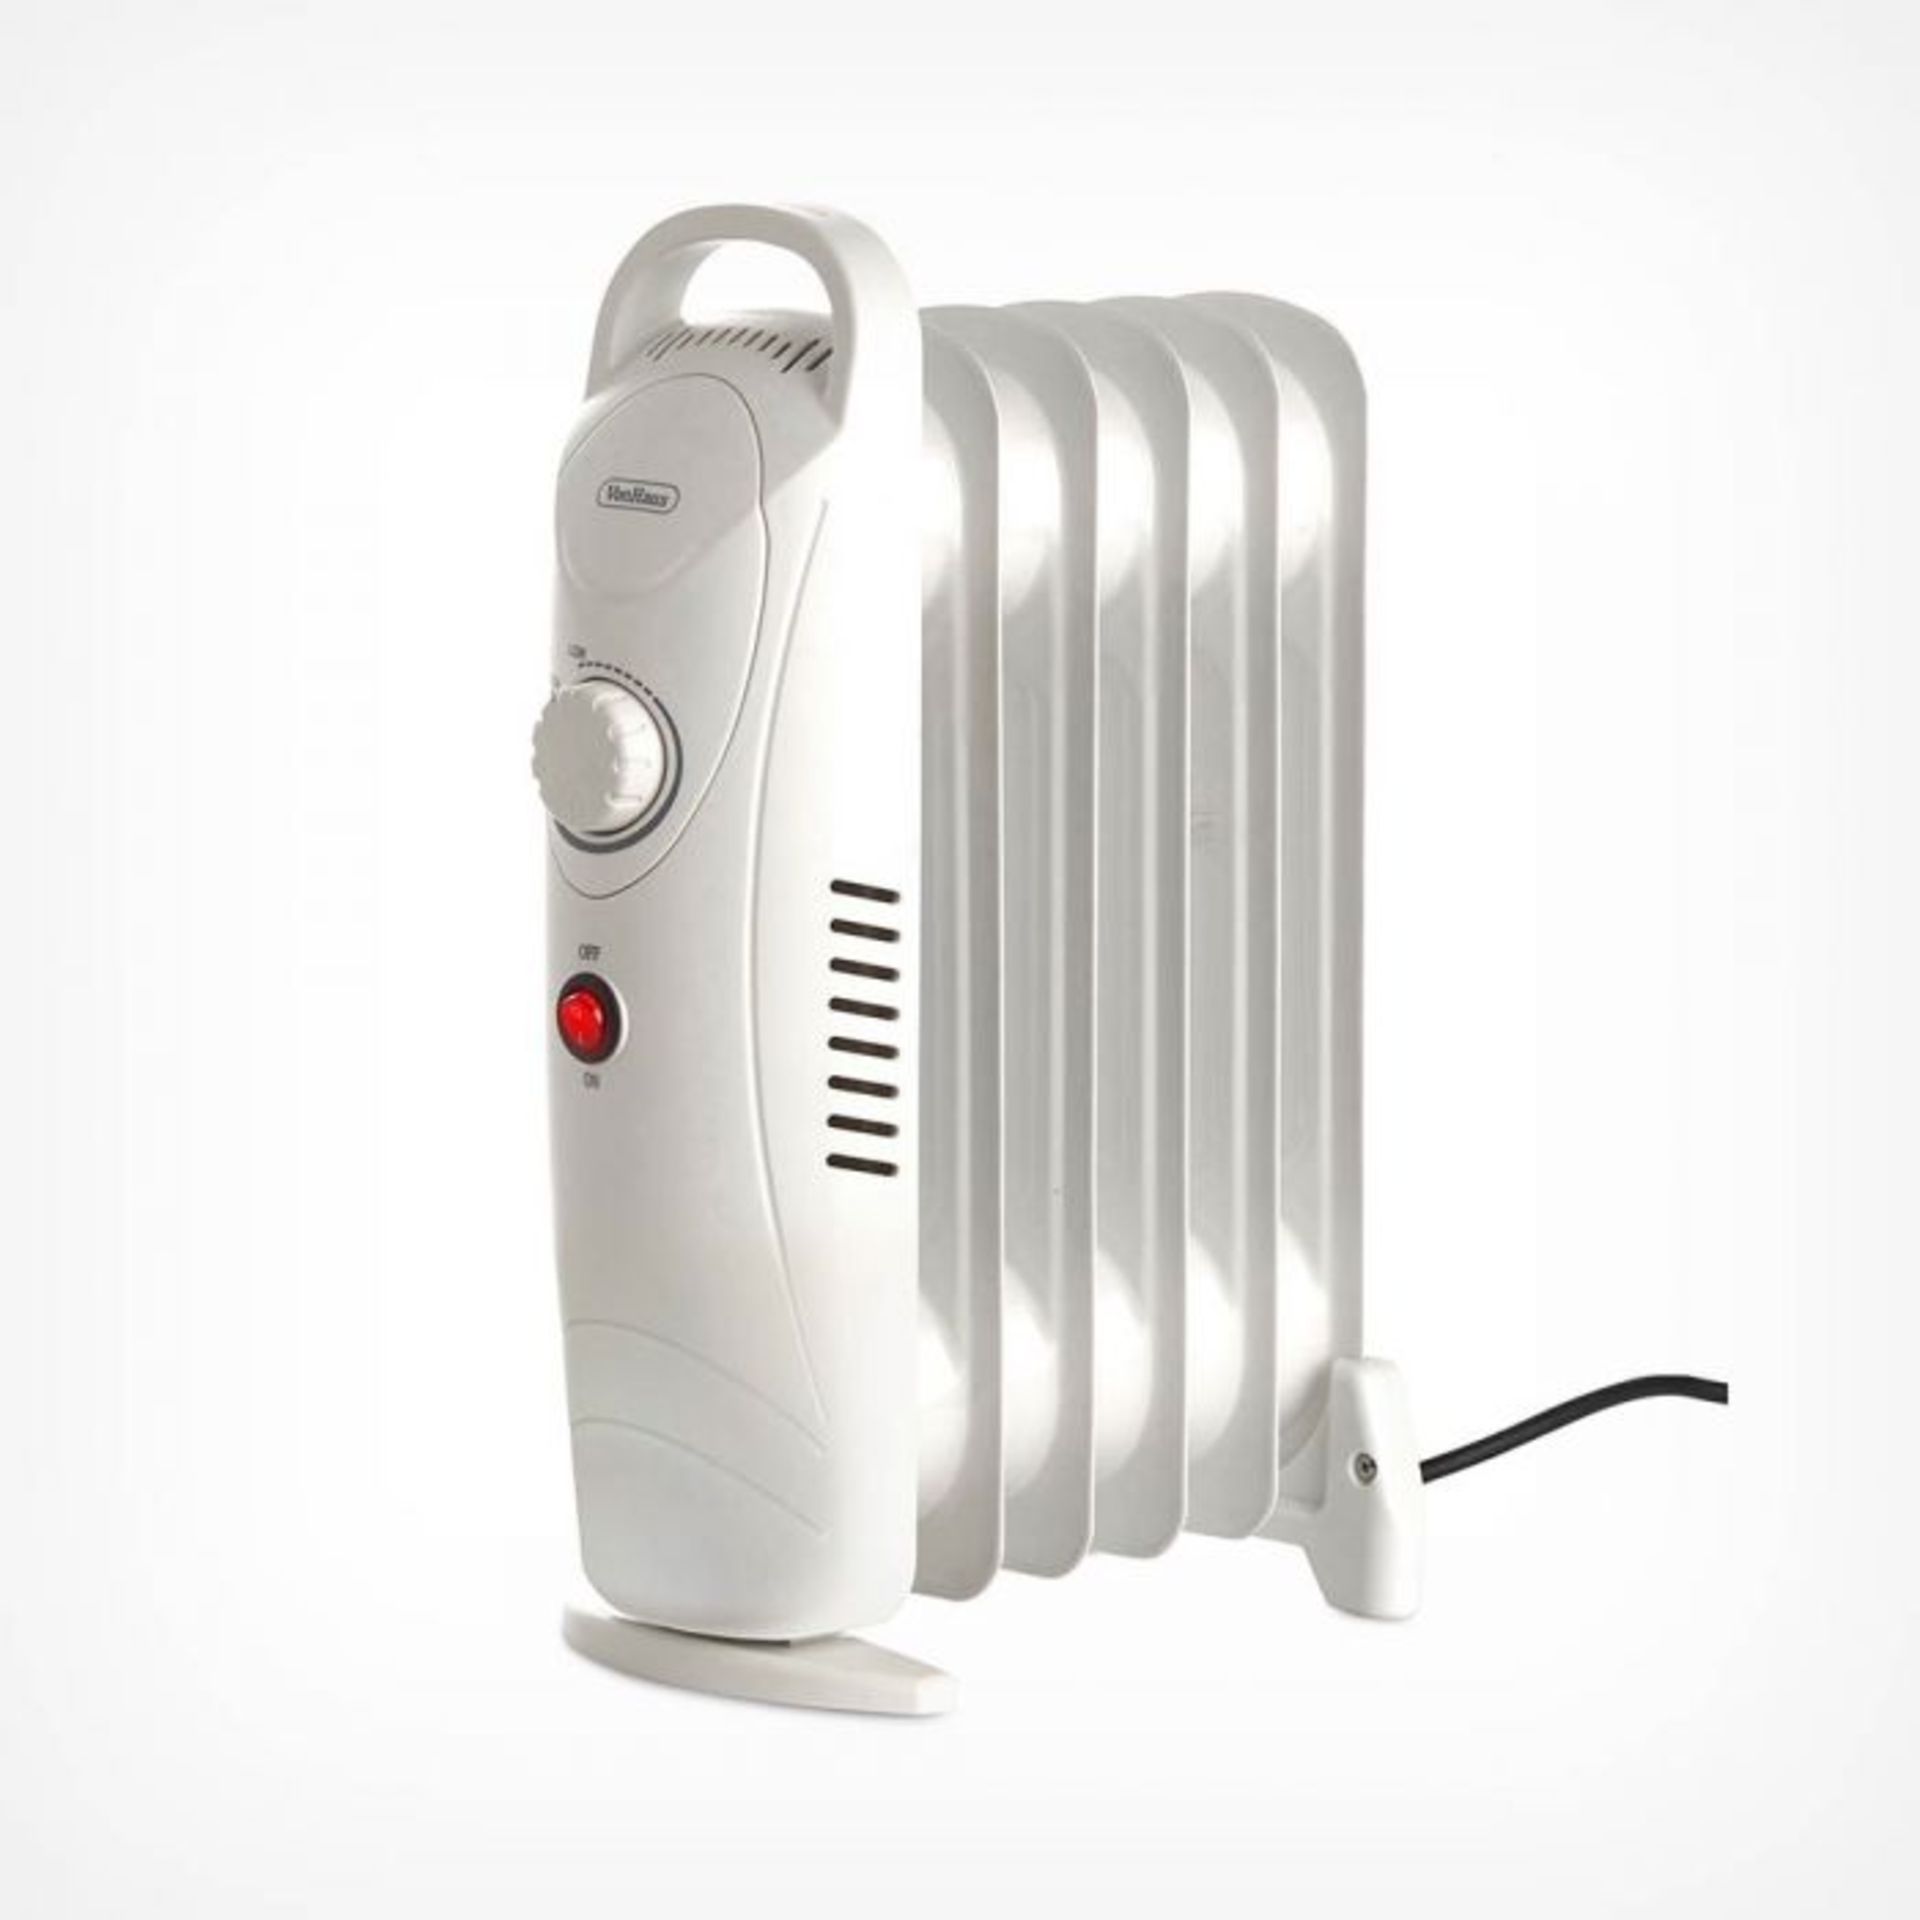 (V150) 6 Fin 800W Oil Filled Radiator - White Compact yet powerful 800W radiator with 6 oil-fi... - Image 2 of 3